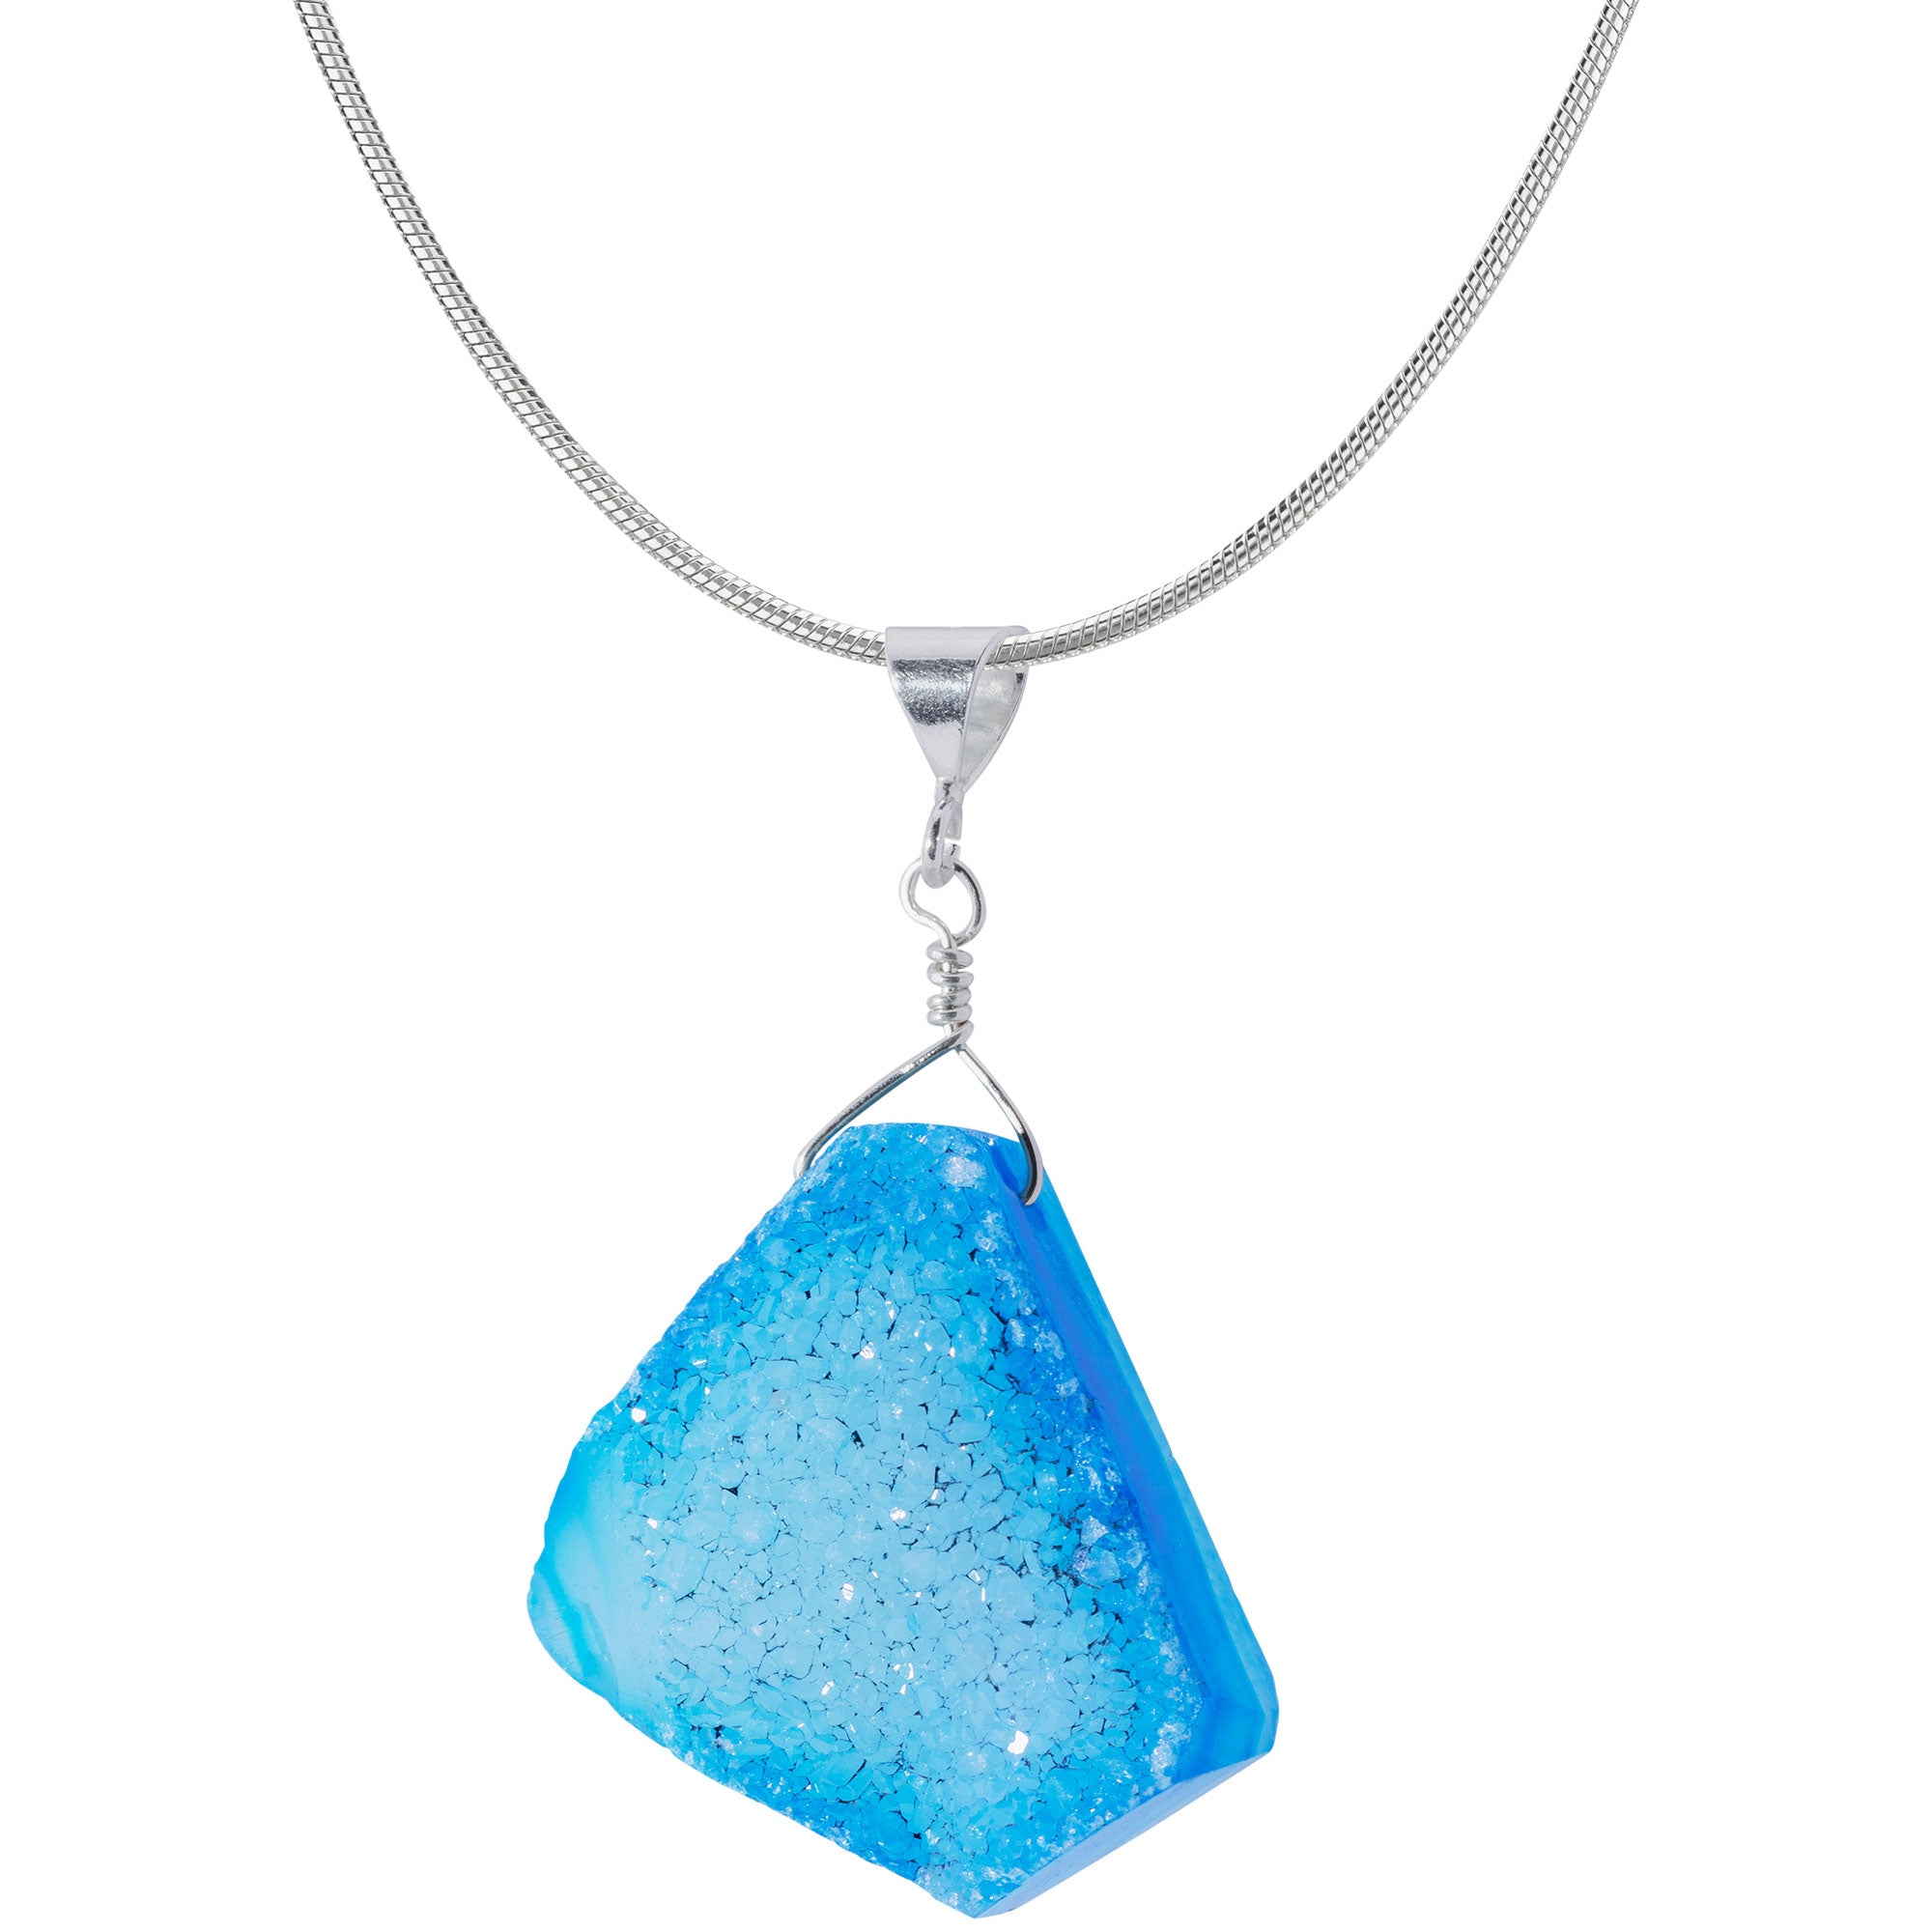 Cool Hues Sterling Silver & Druzy Necklace - Cobalt Blue - Pendant Only